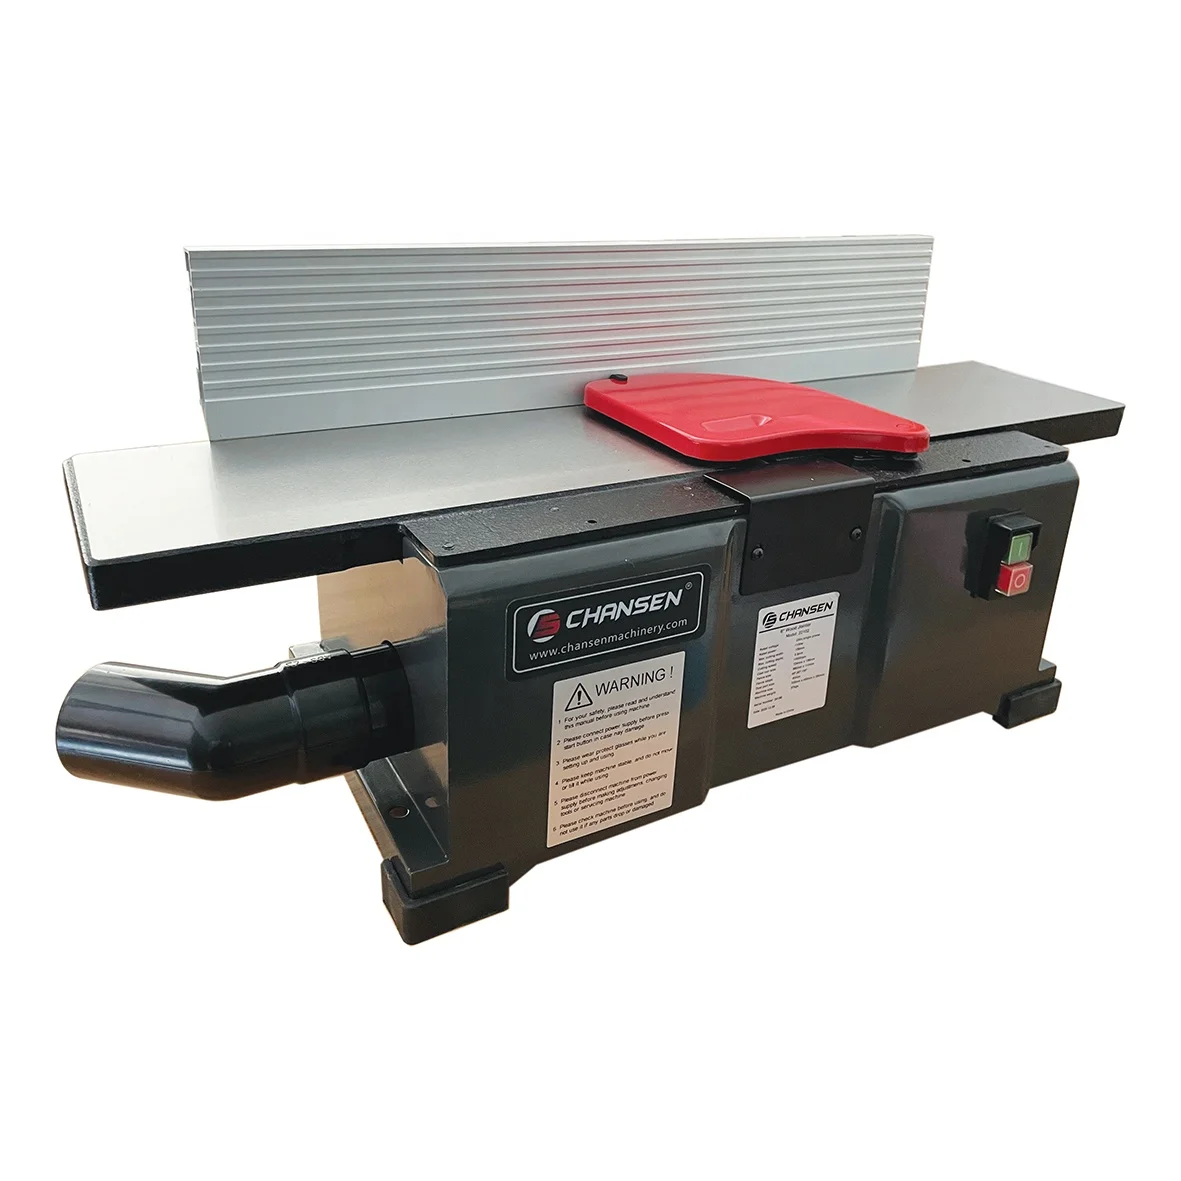 Item22102 6inch Benchtop Jointer With Helical Cutterhead Buy Bench Jointer